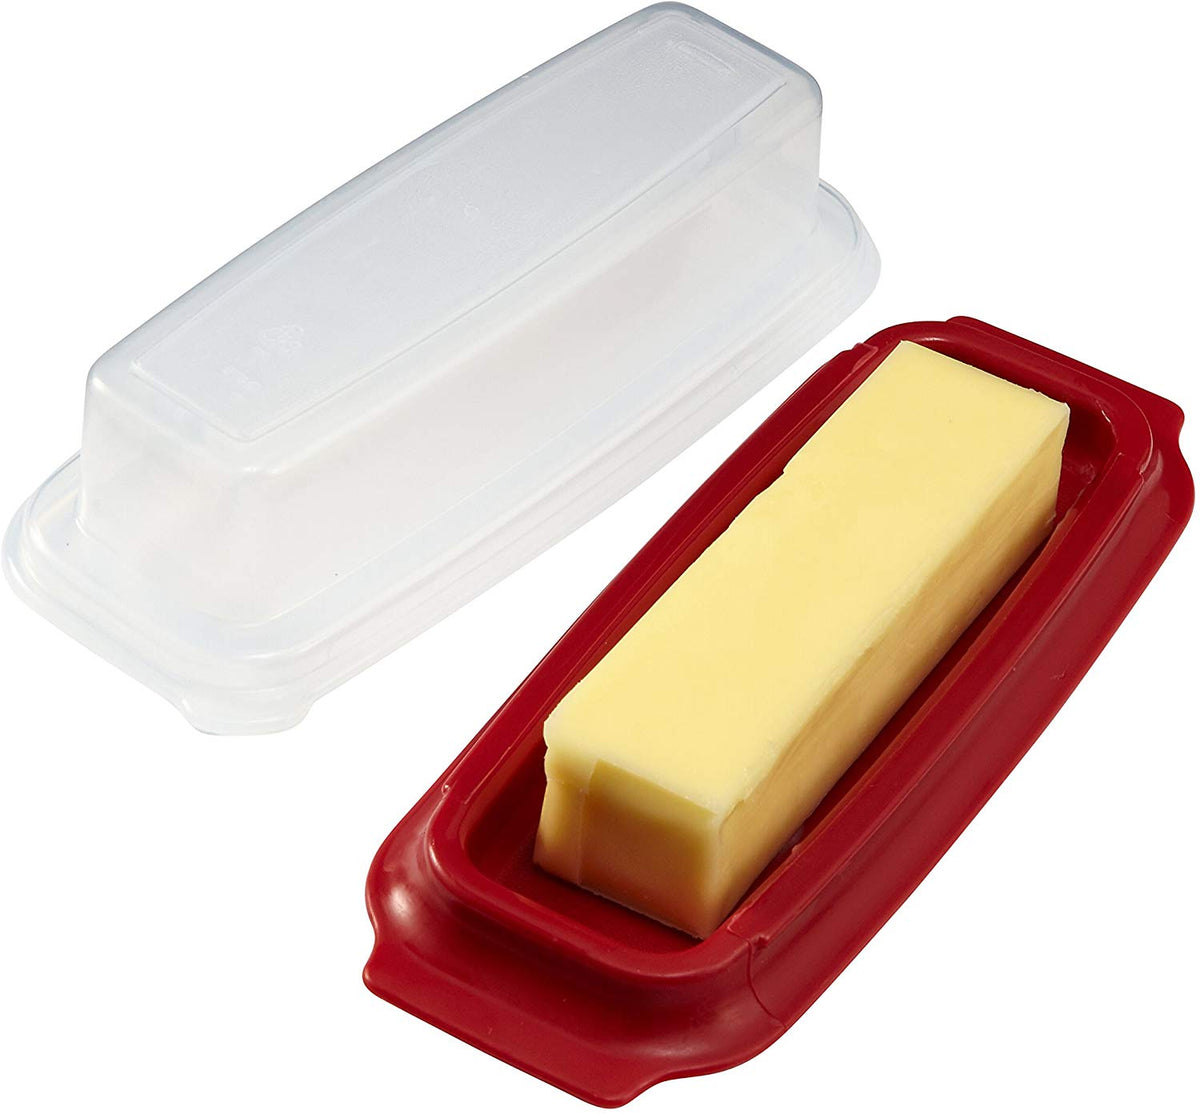 Rubbermaid 1777193 Servin' Saver Butter Dish, Clear Base with